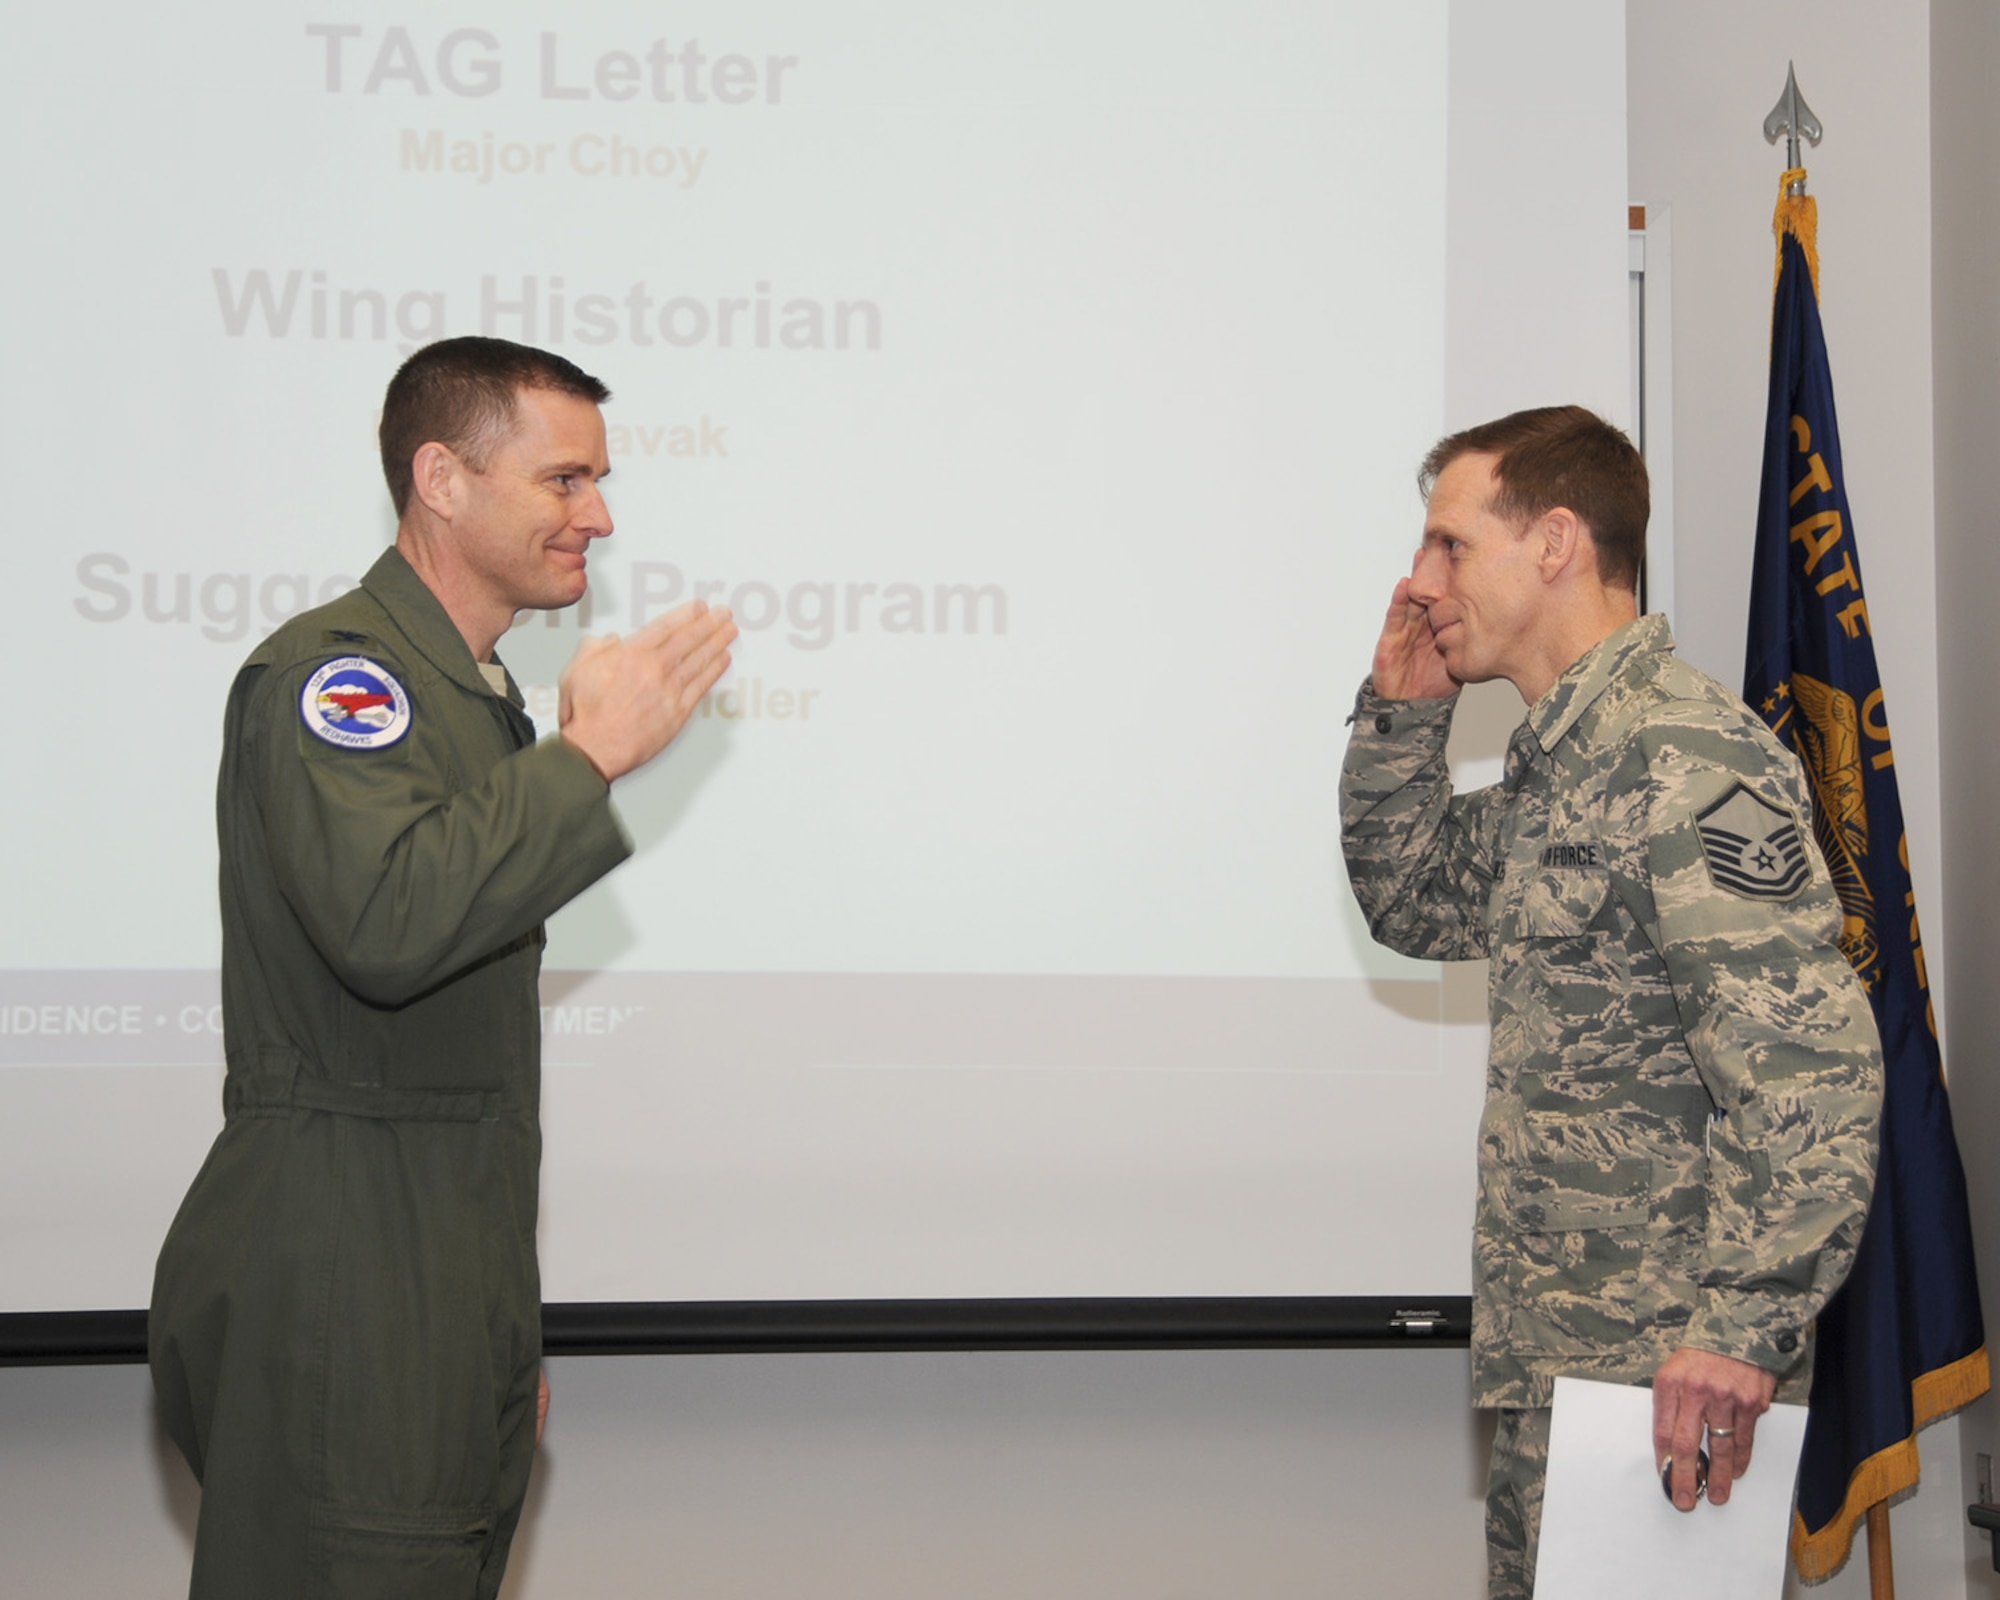 Oregon Air National Guard Col. Rick Wedan, 142nd Fighter Wing commander, salutes Master Sgt. Michael Chandler after presenting him with a certificate for his award under the Air Force’s “Every Dollar Counts” campaign, Portland Air National Guard Base, Ore., Feb. 28, 2014.  (U.S. Air National Guard photo by Master Sgt. Shelly Davison, 142nd Fighter Wing Public Affairs/Released)